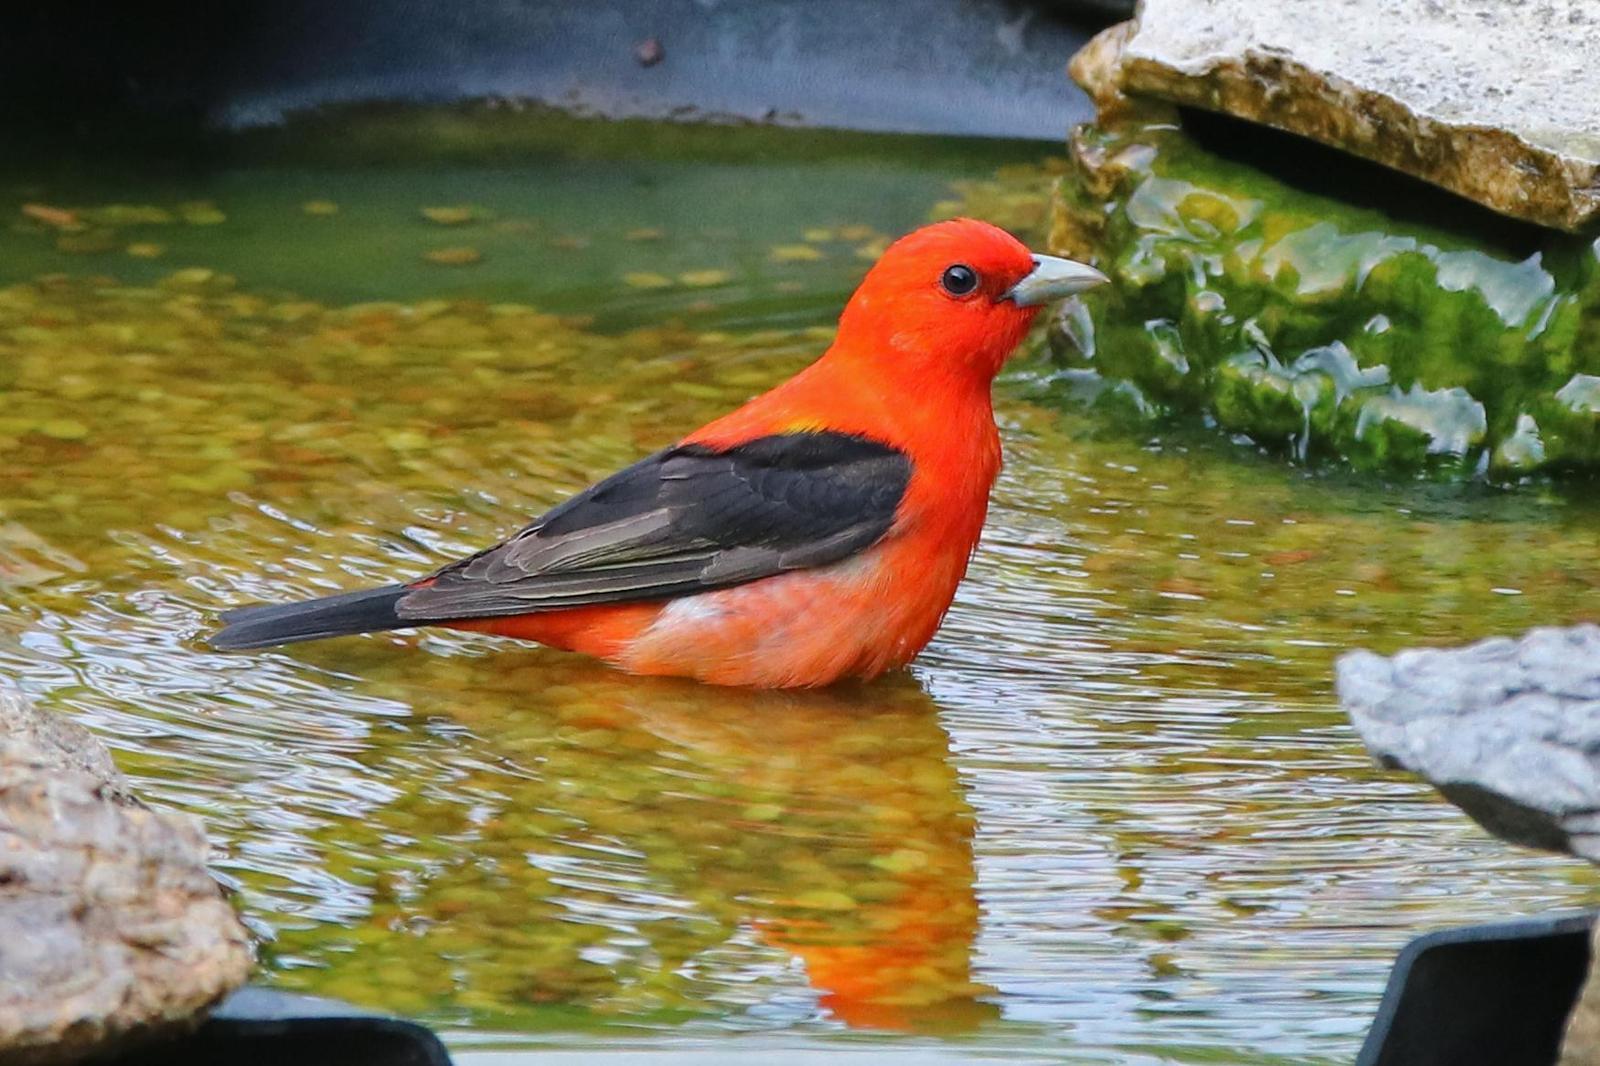 Scarlet Tanager Photo by Kristy Baker